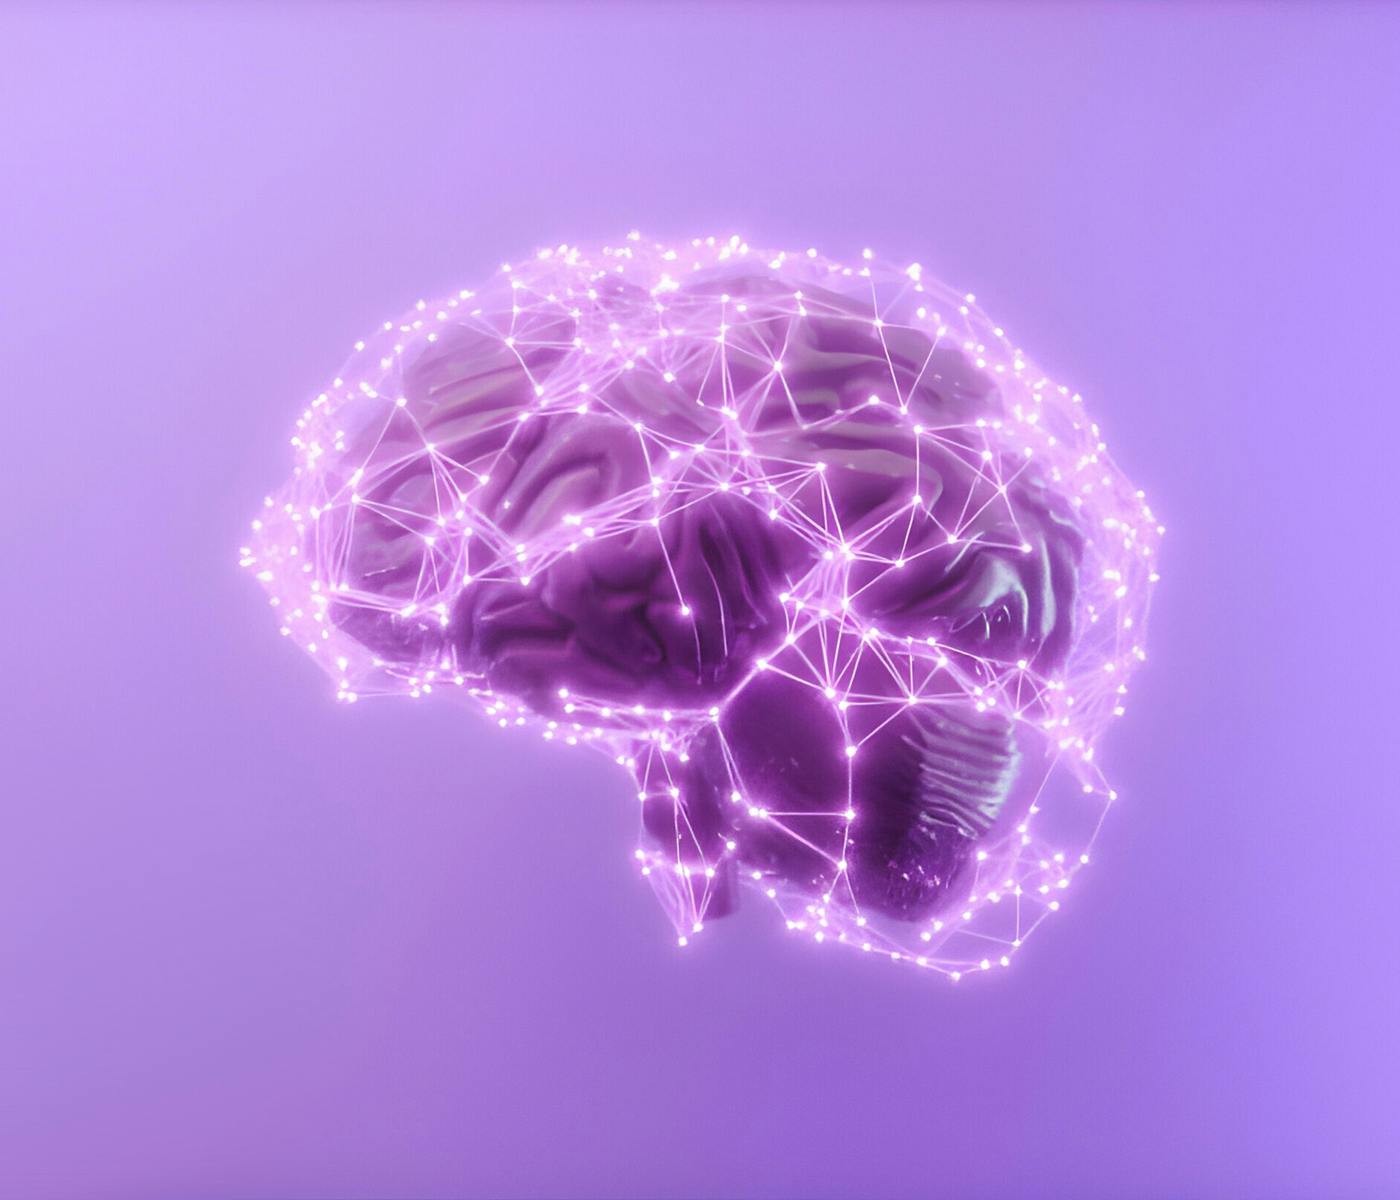 Graphic representation of a human brain and neuronal connections on a purple background.